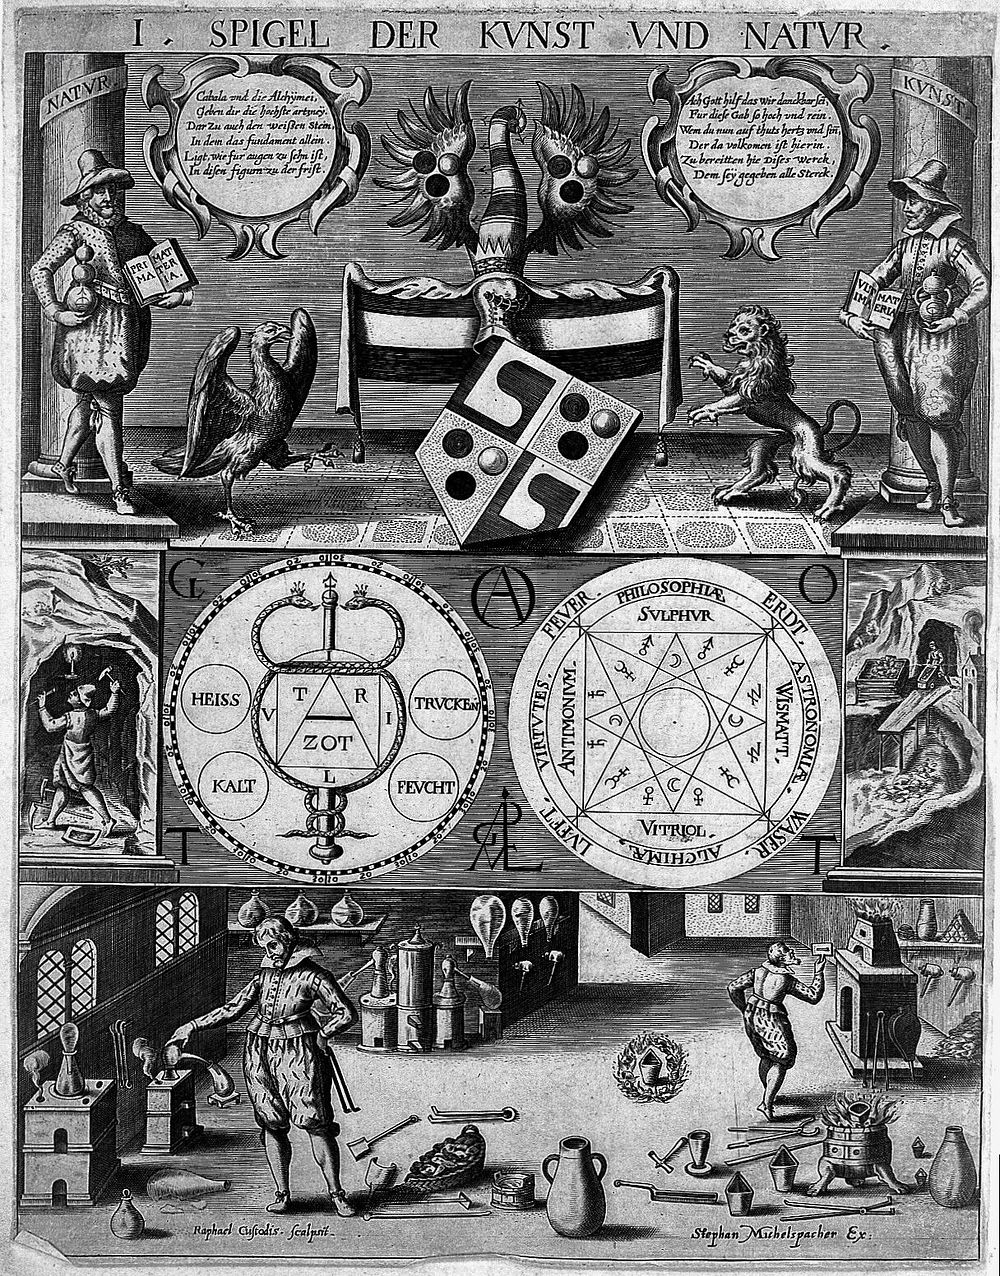 Three-tiered symbolic diagram of the art of alchemy: top level, symbols of the states of matter; middle level, cabalistic…